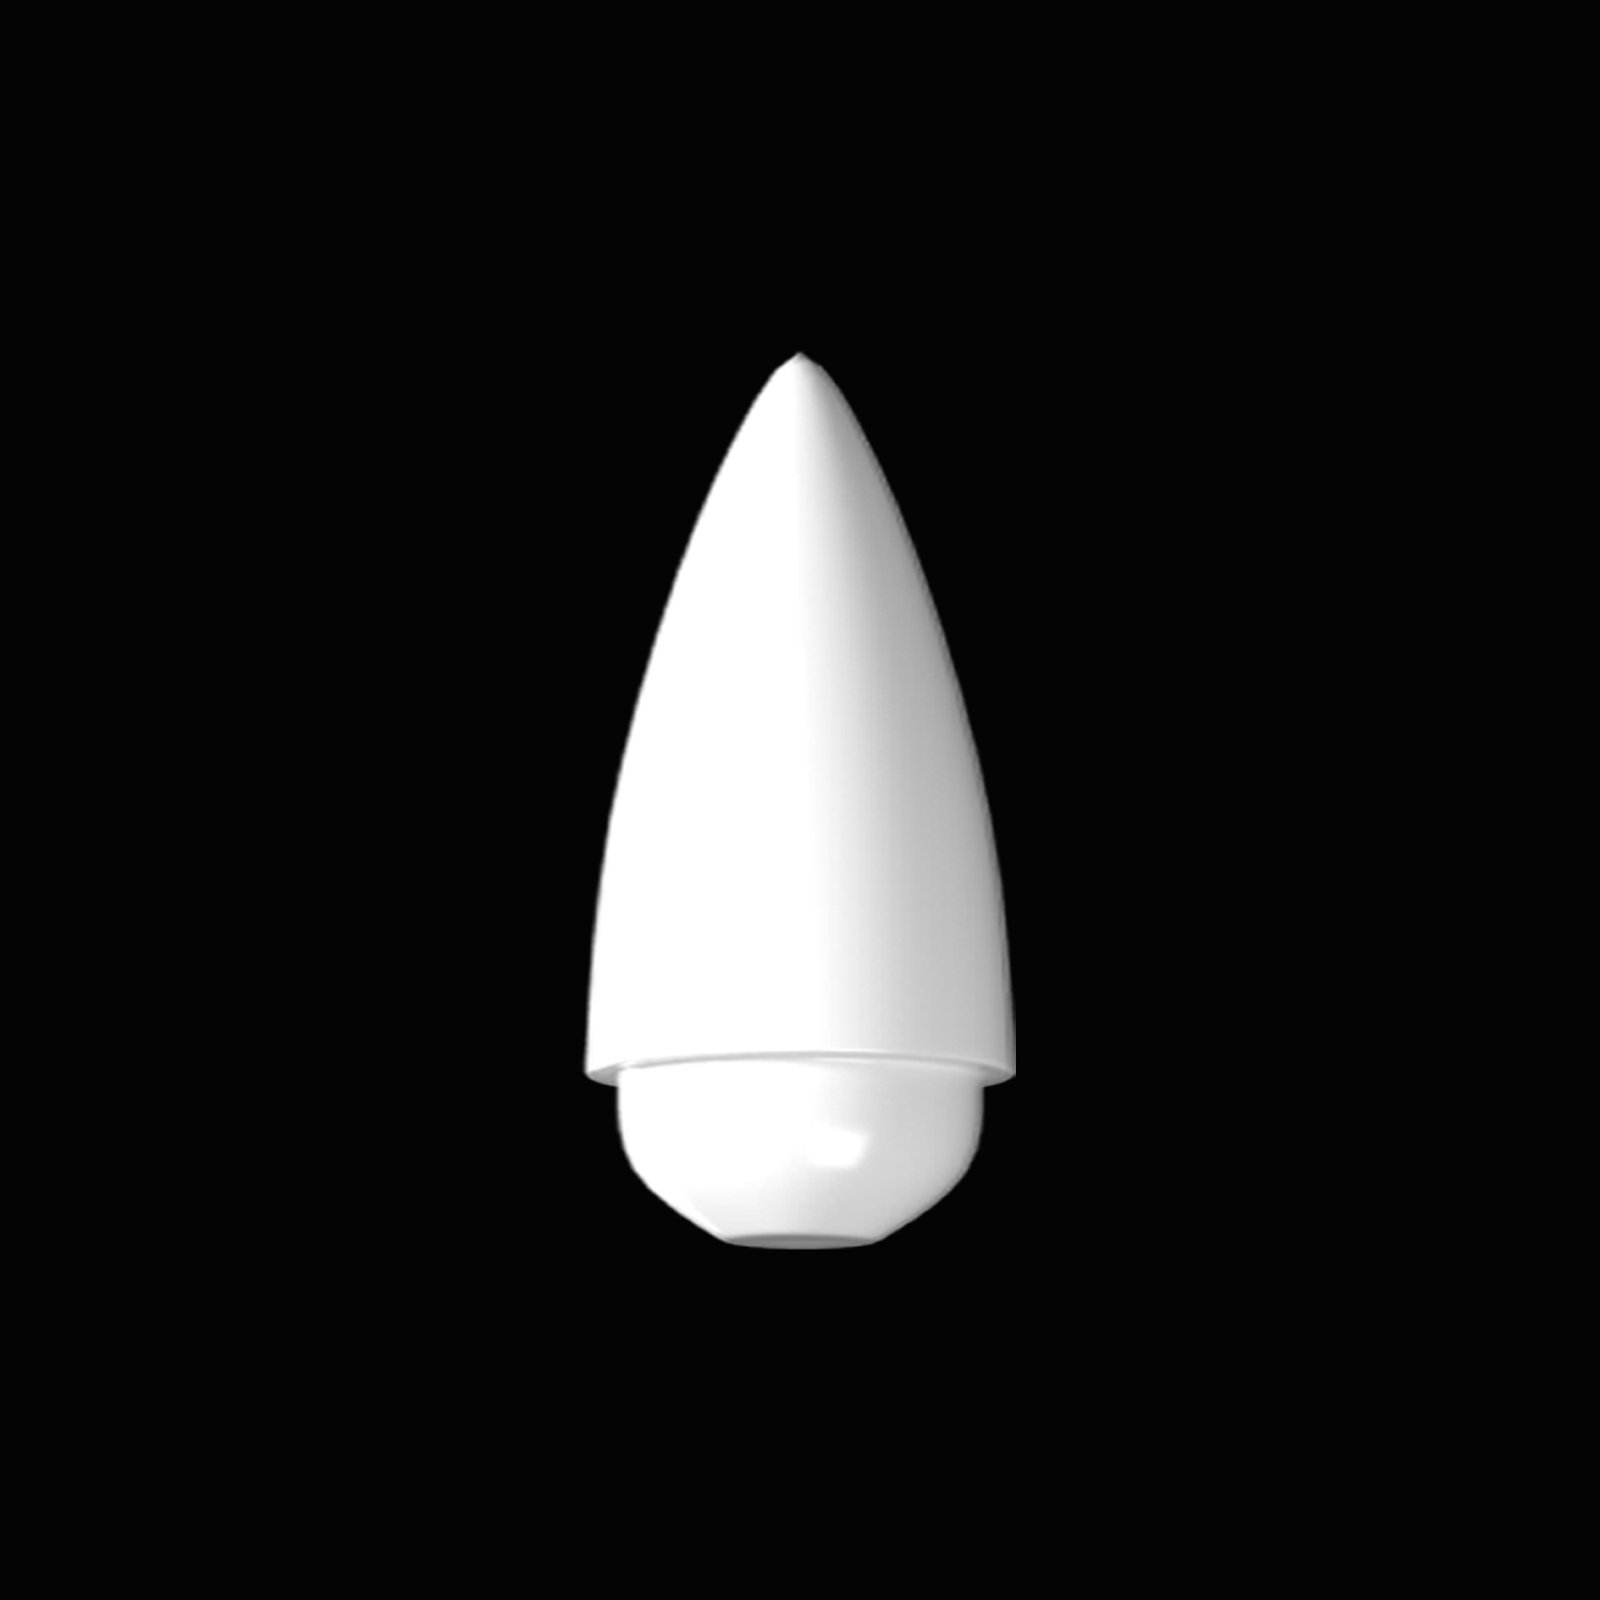 Nose Cone Rocketeers